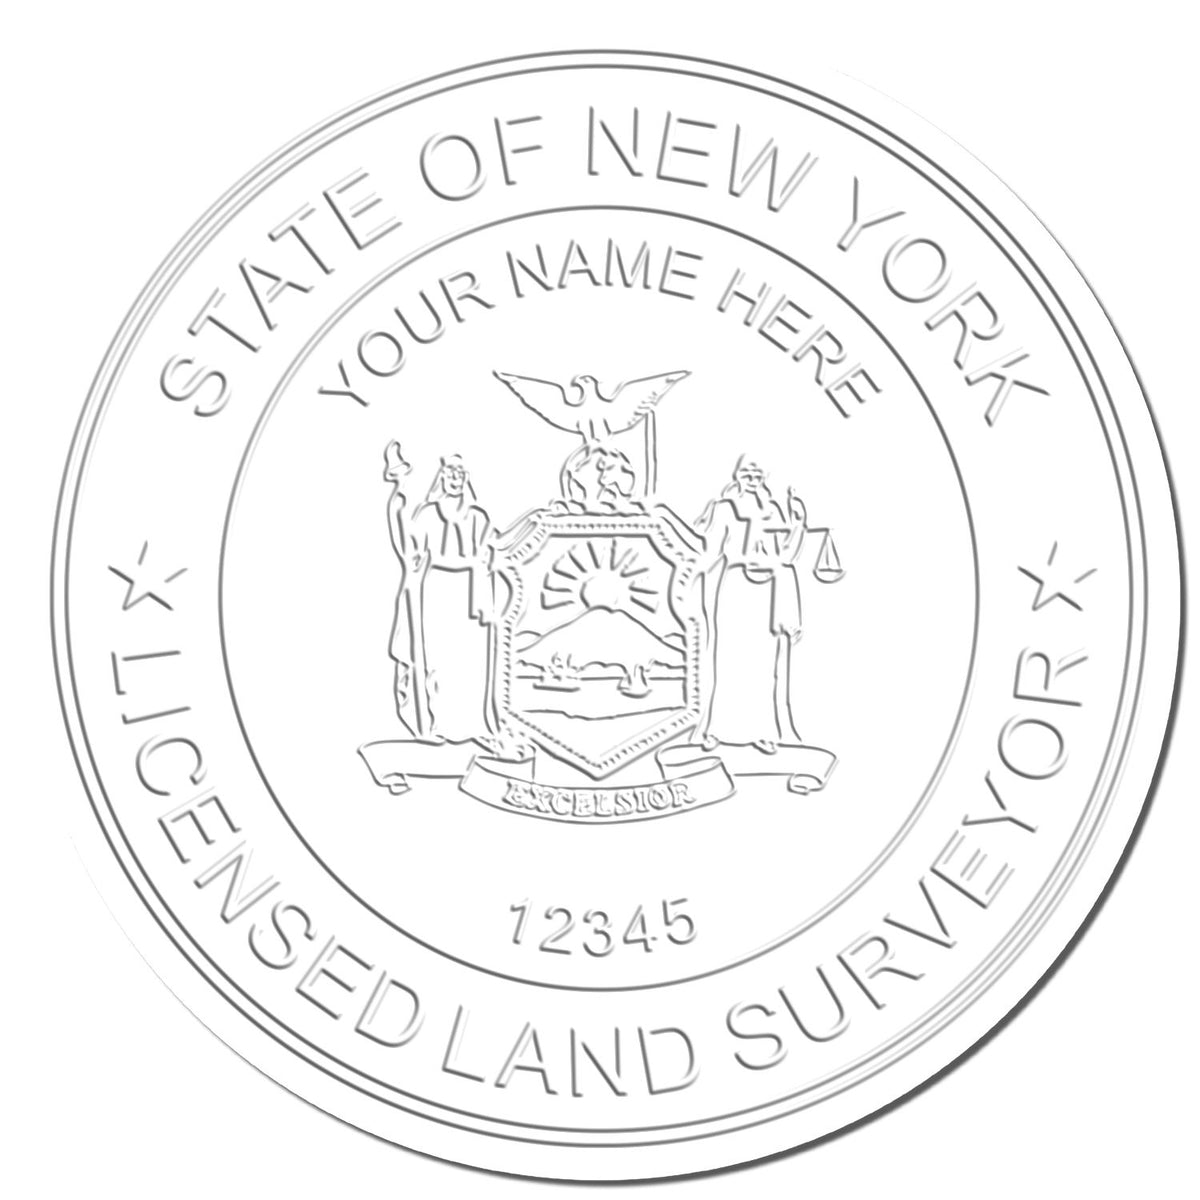 This paper is stamped with a sample imprint of the State of New York Soft Land Surveyor Embossing Seal, signifying its quality and reliability.